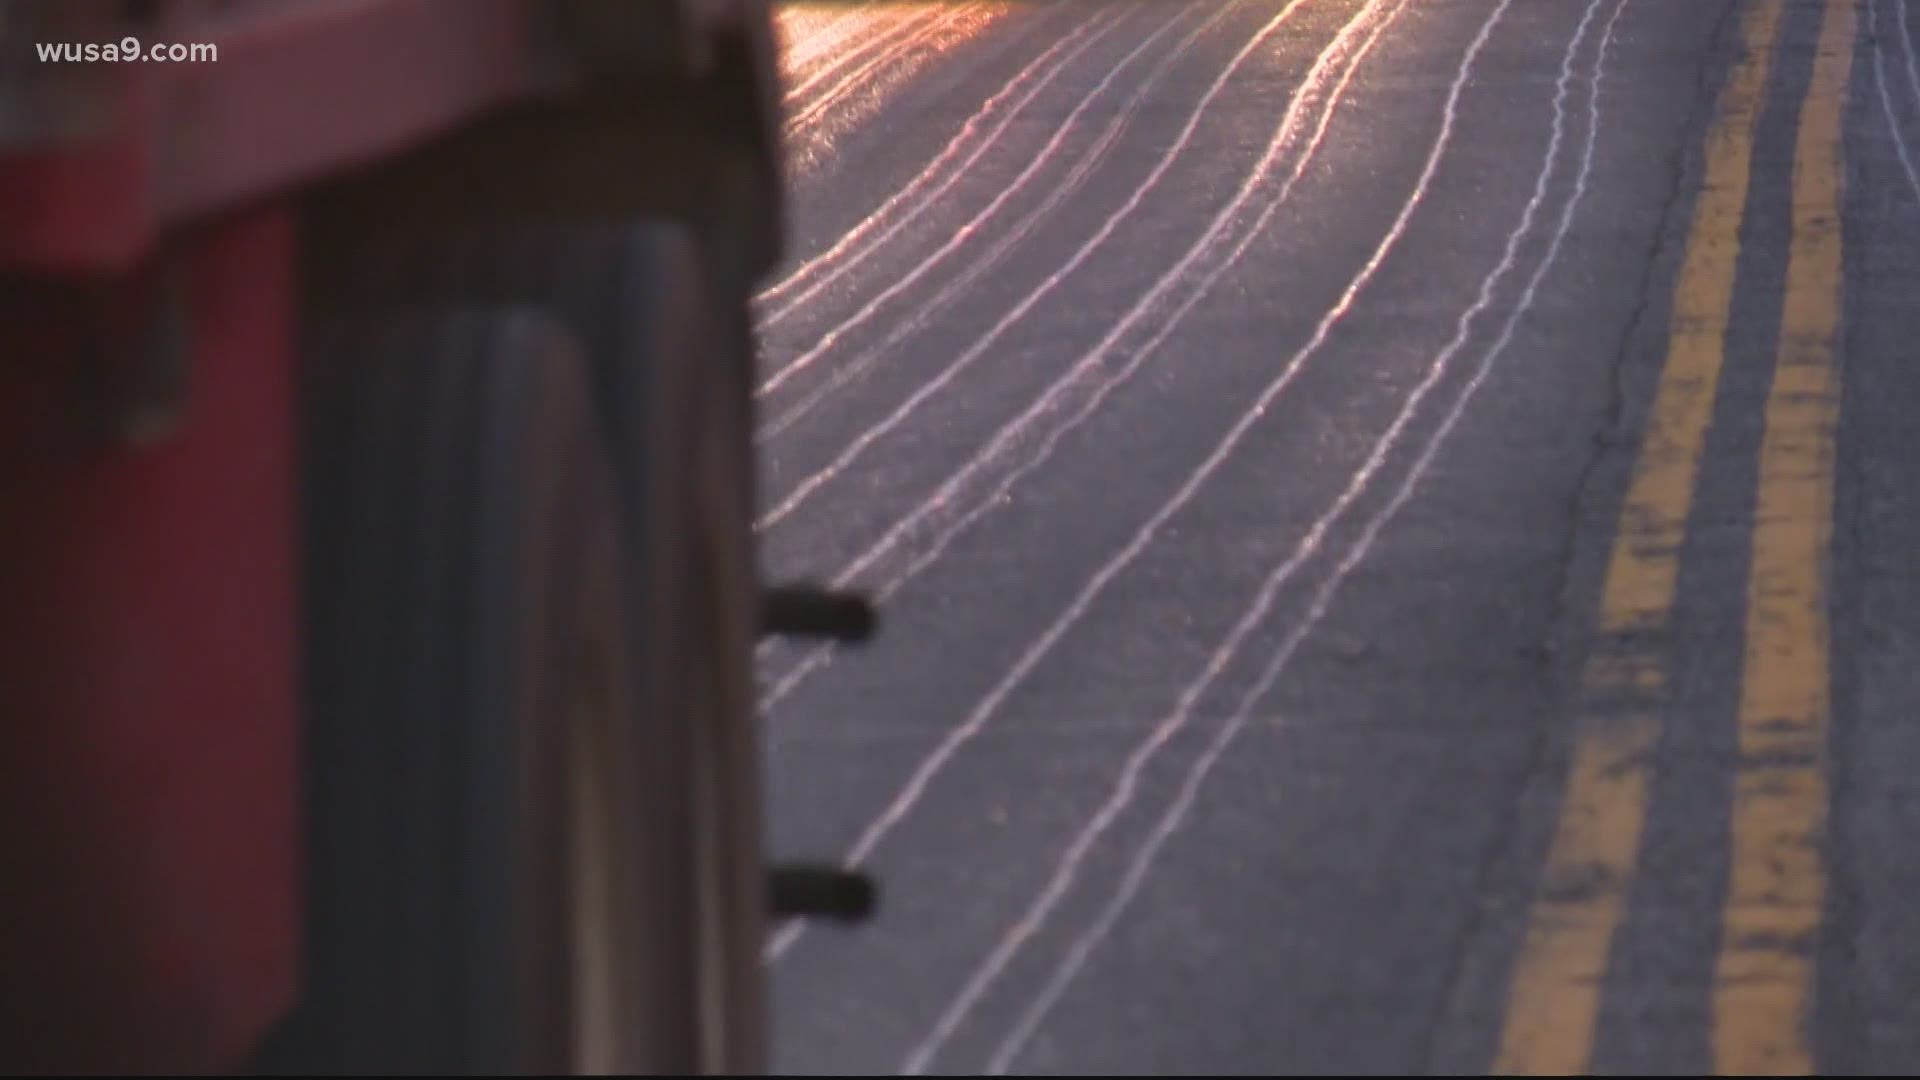 DC Department of Public Works says more than 200 trucks are working to keep roads clear